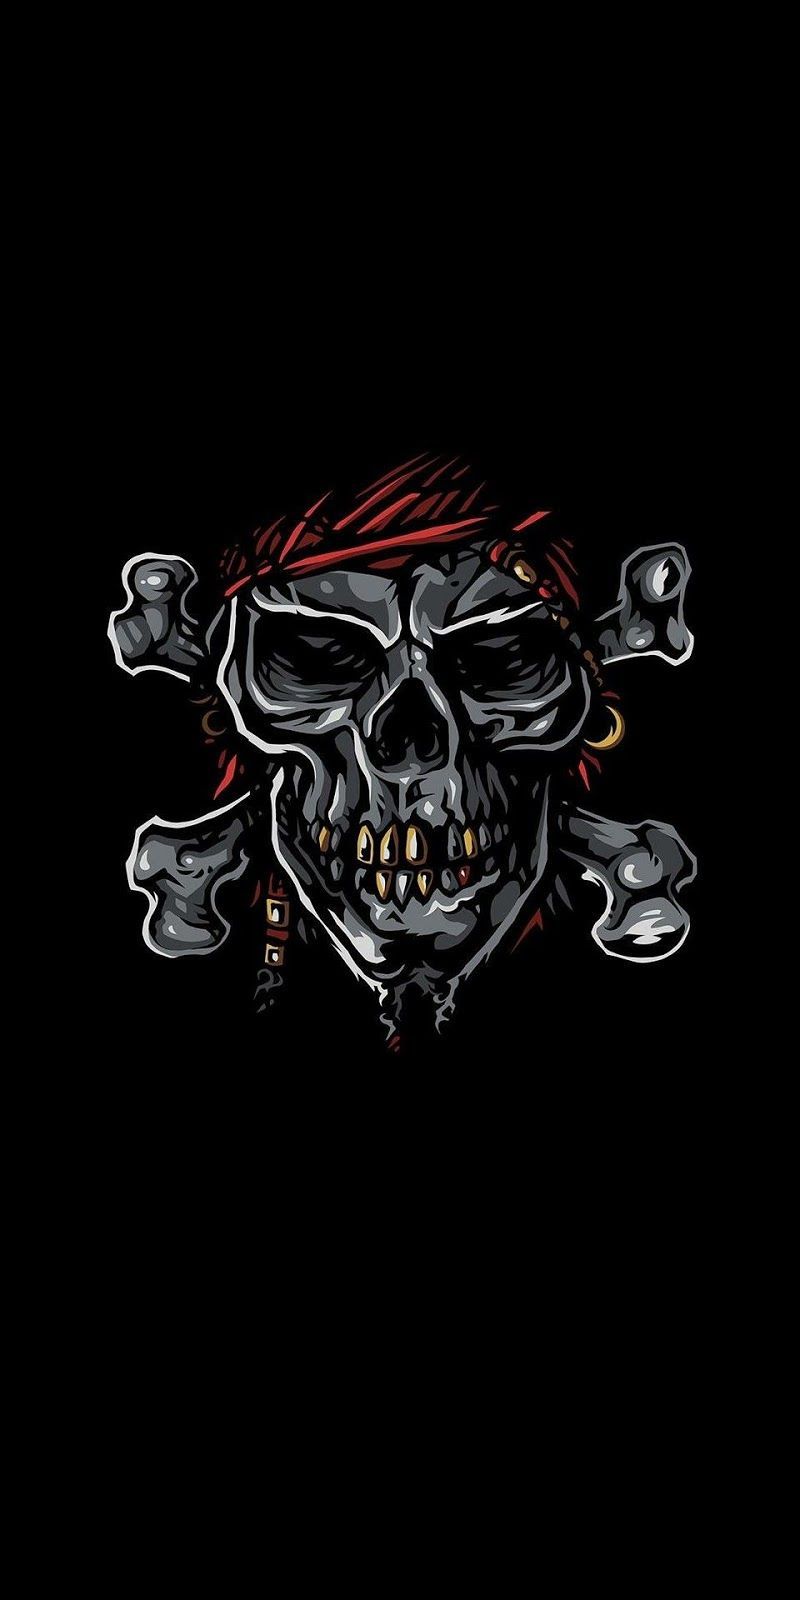 Best Wallpaper For Android and iOS. Skull wallpaper